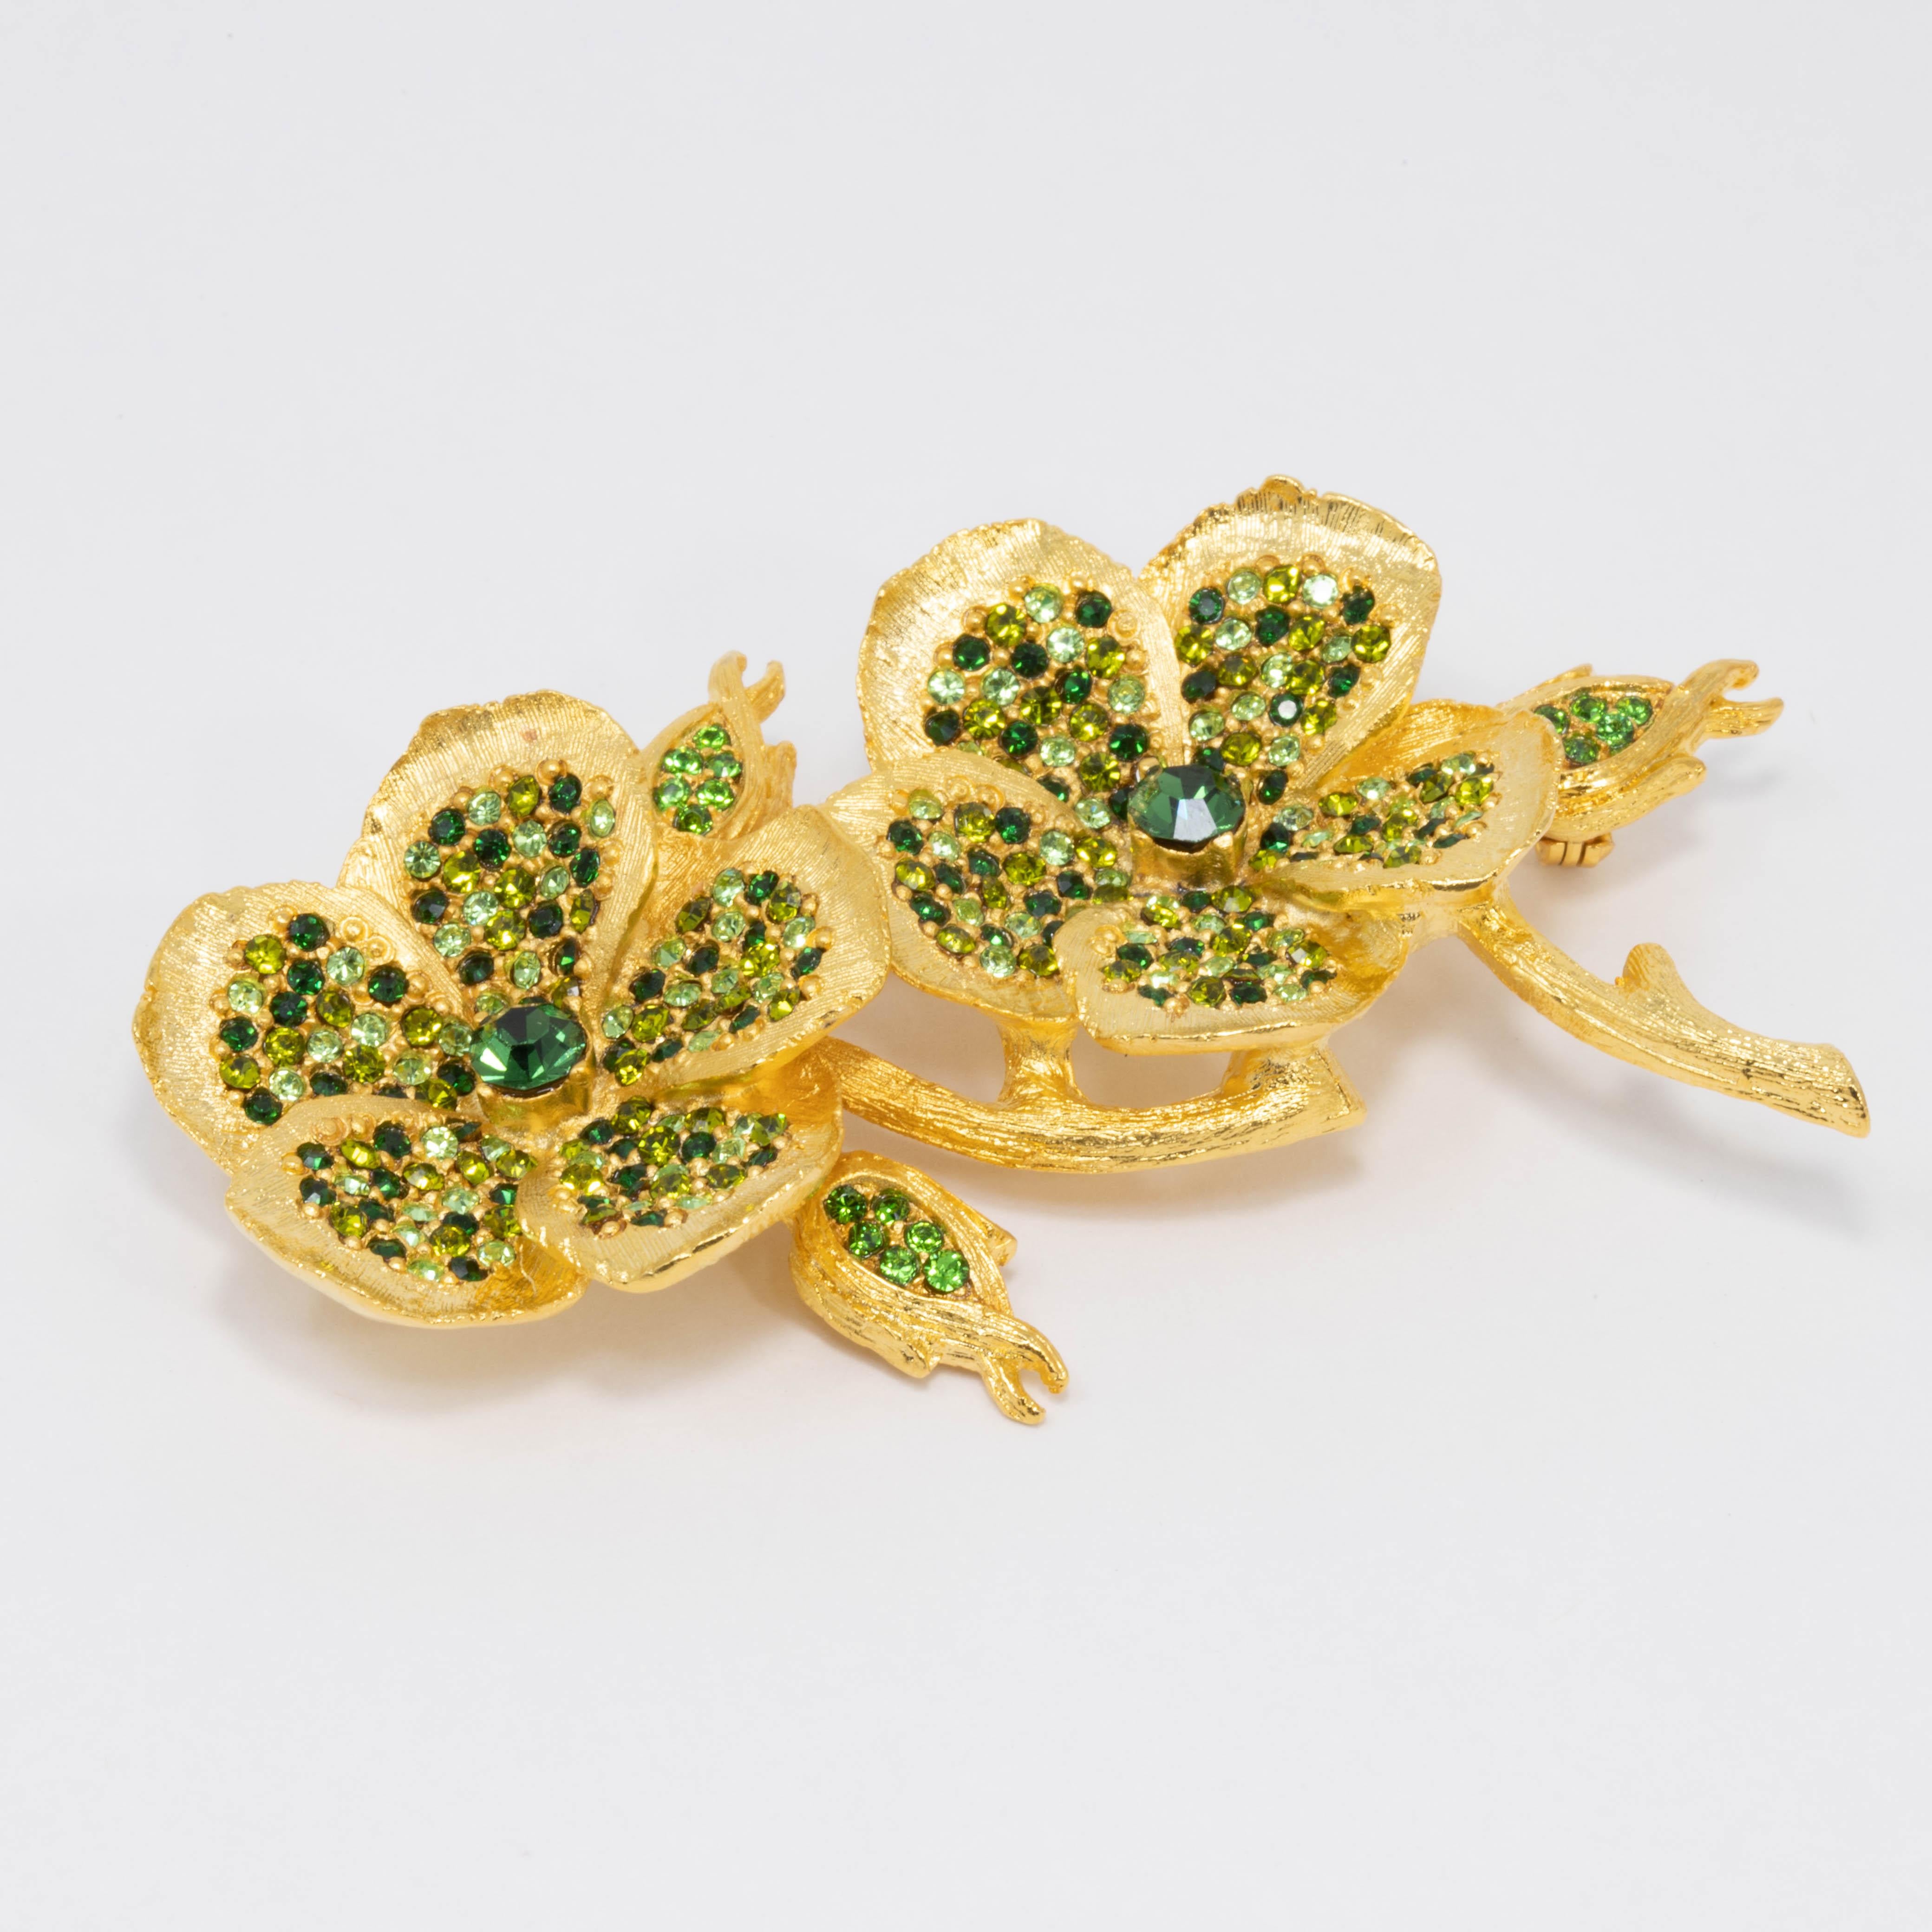 Mesmerizing green crystal centers surrounded by mini rhinestones in shades of green give this golden pin brooch a luxurious, verdant look.

Gold plated. By Kenneth Jay Lane. 

Tags, Marks, Hallmarks: Kenneth © Lane, Made in USA